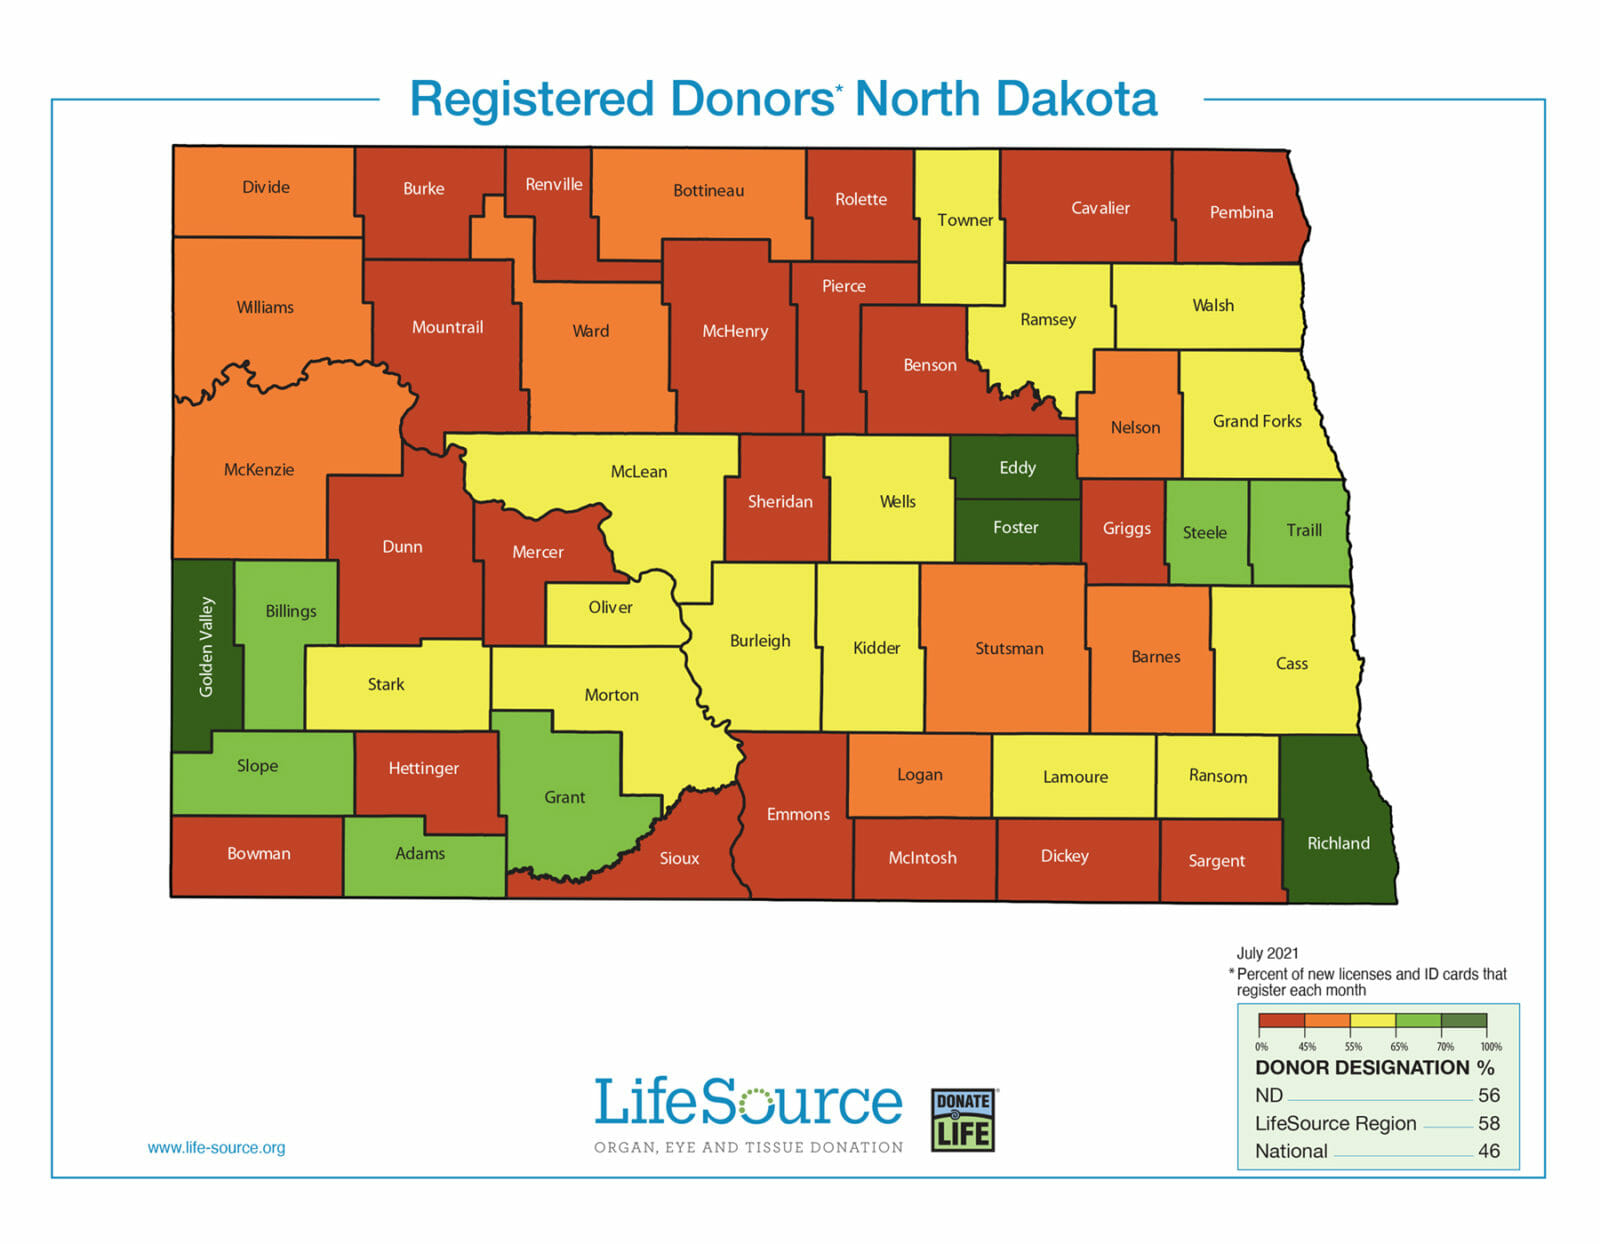 map of ND and designation rate shown by color